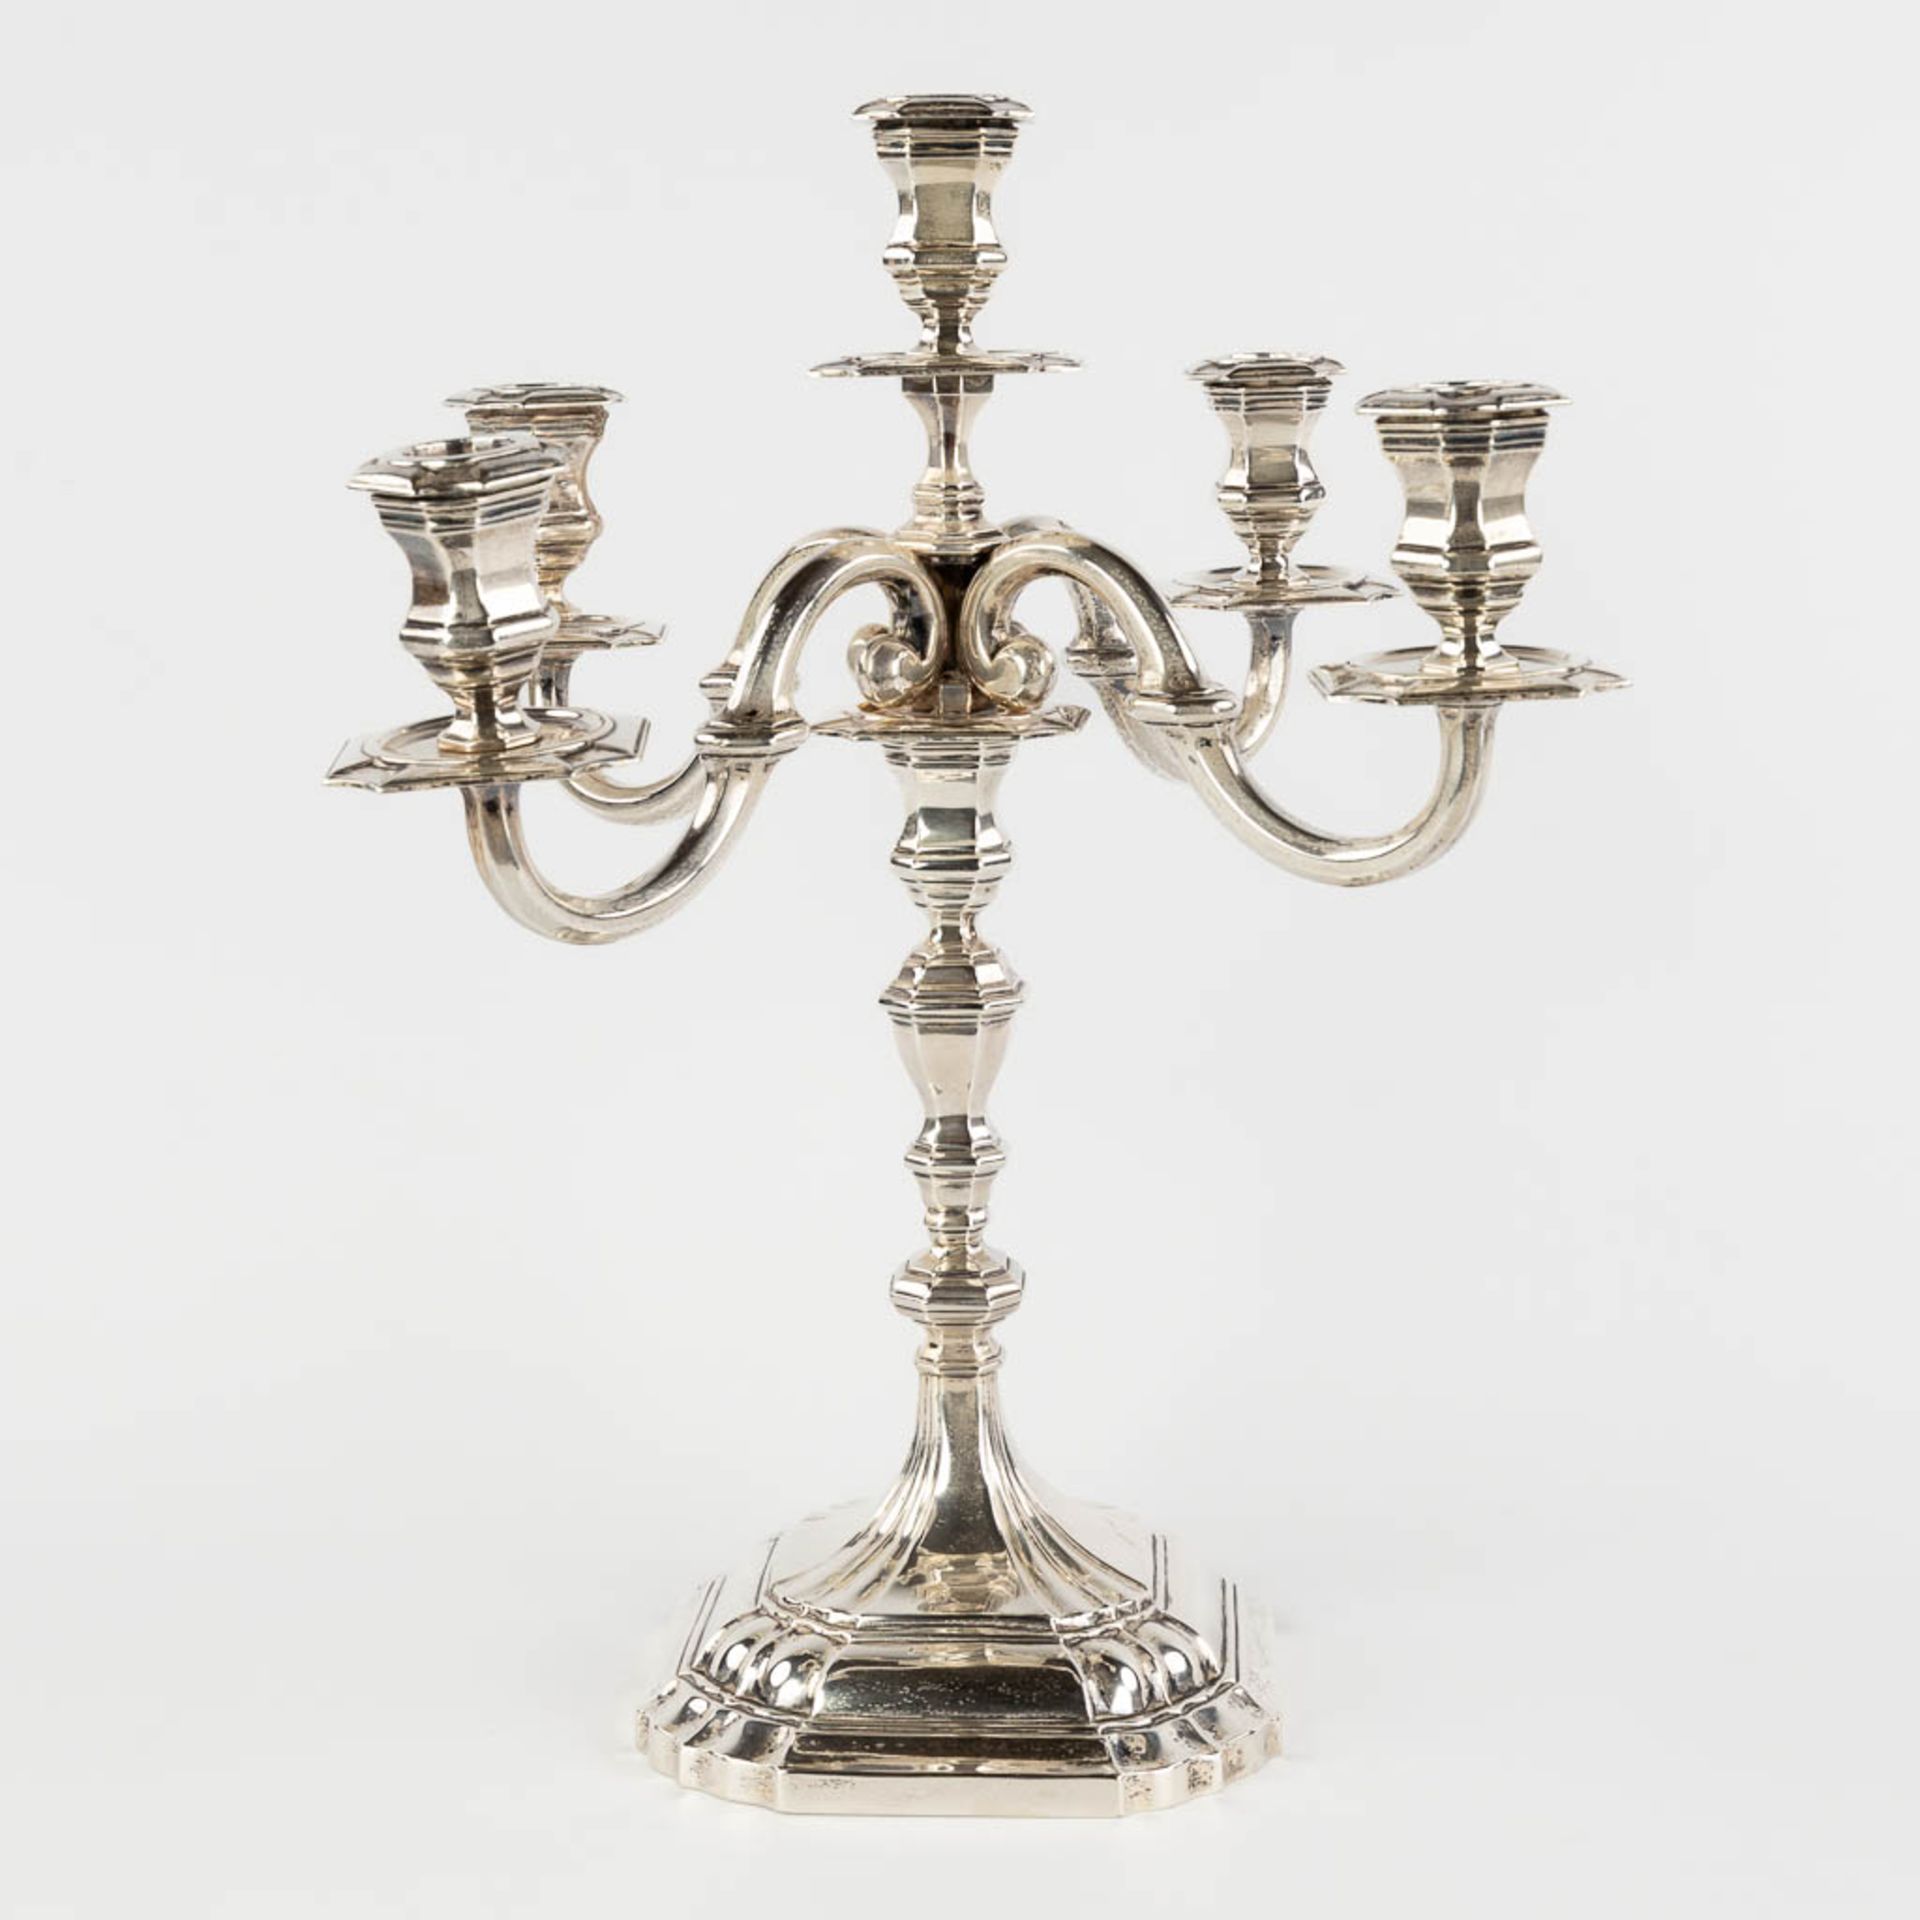 A silver 5 candle candelabra, 950M. Signed Lens Anvers. Belgium, 20th C. (L:23,5 x W:23,5 x H:33 cm) - Image 4 of 10